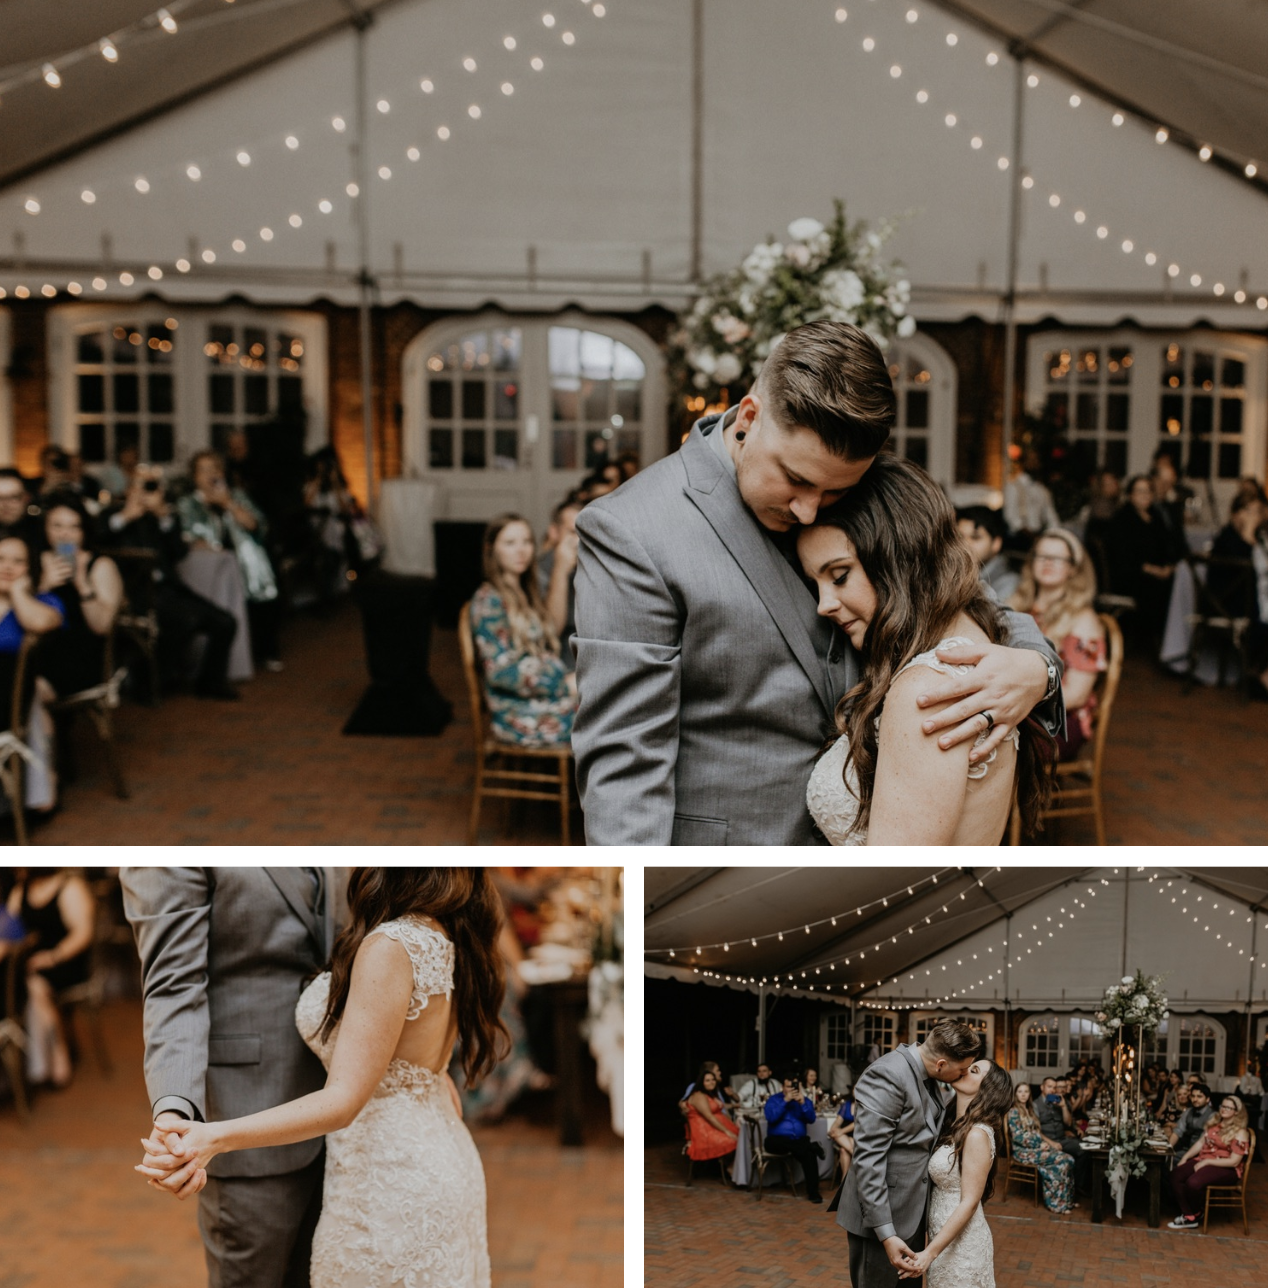 The bride and groom's first dance as husband and wife at Cheekwood.